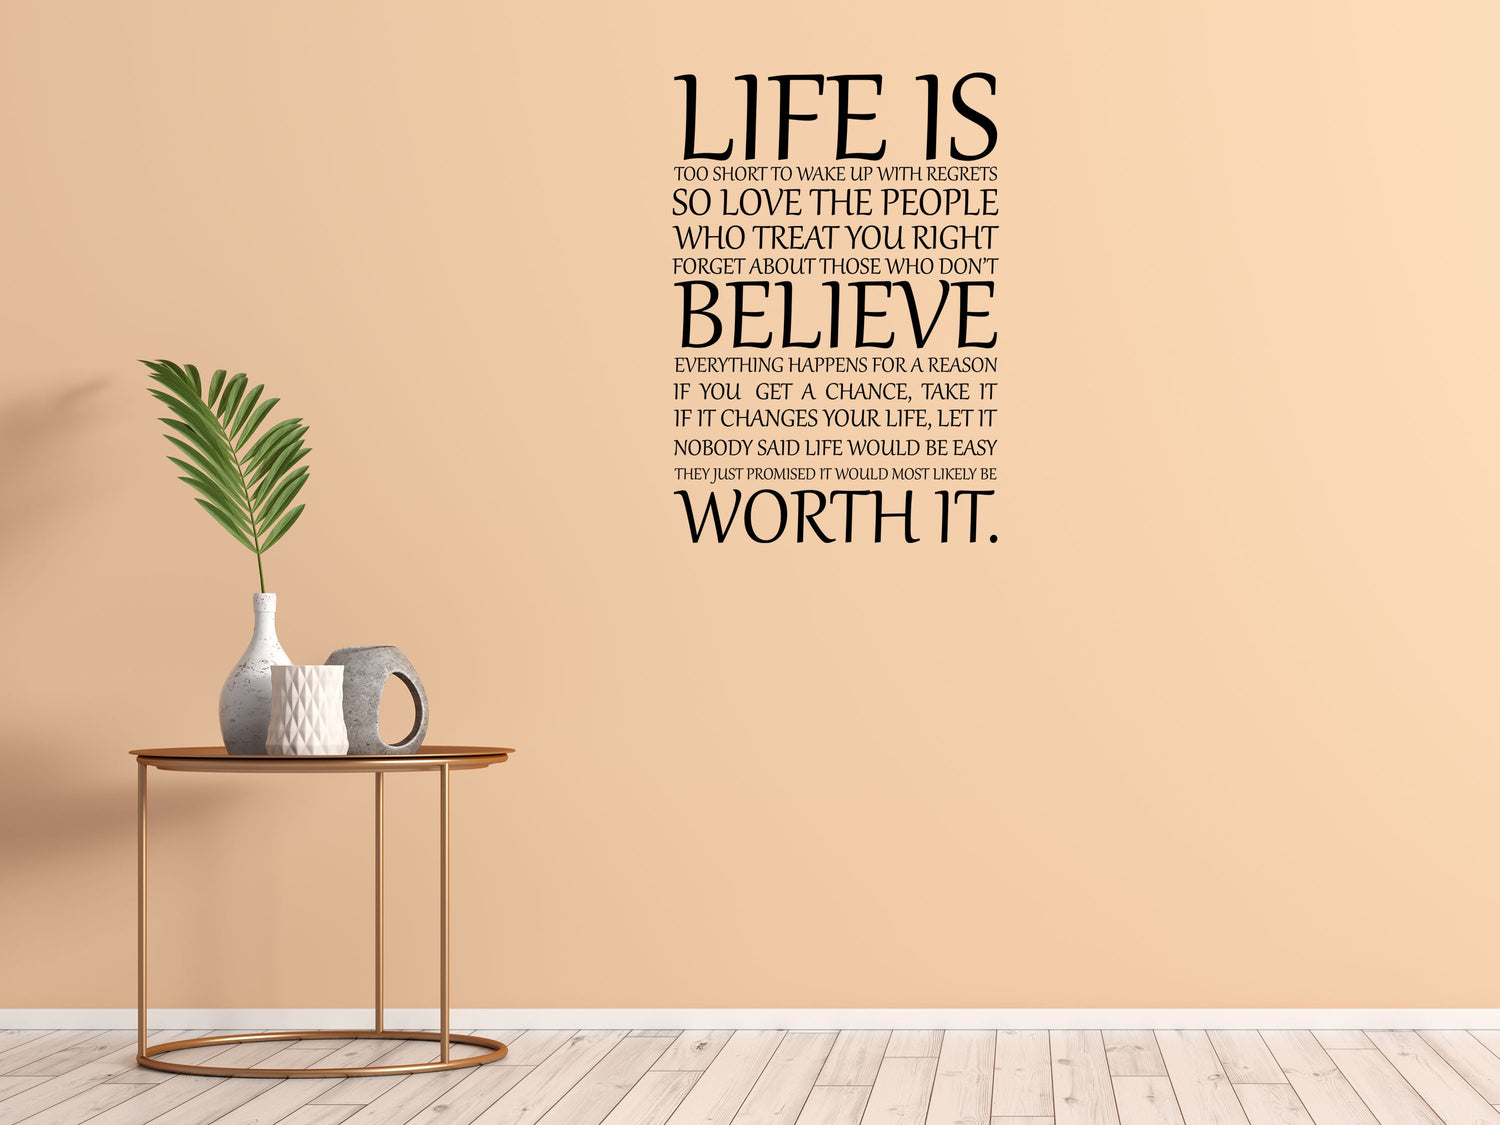 Life Is Too Short To Wake Up With Regrets Wall Decal Inspirational - Believe Wall Quote Sticker - Worth It Wall Decal - Motivational Quote Vinyl Wall Decal Title Done 